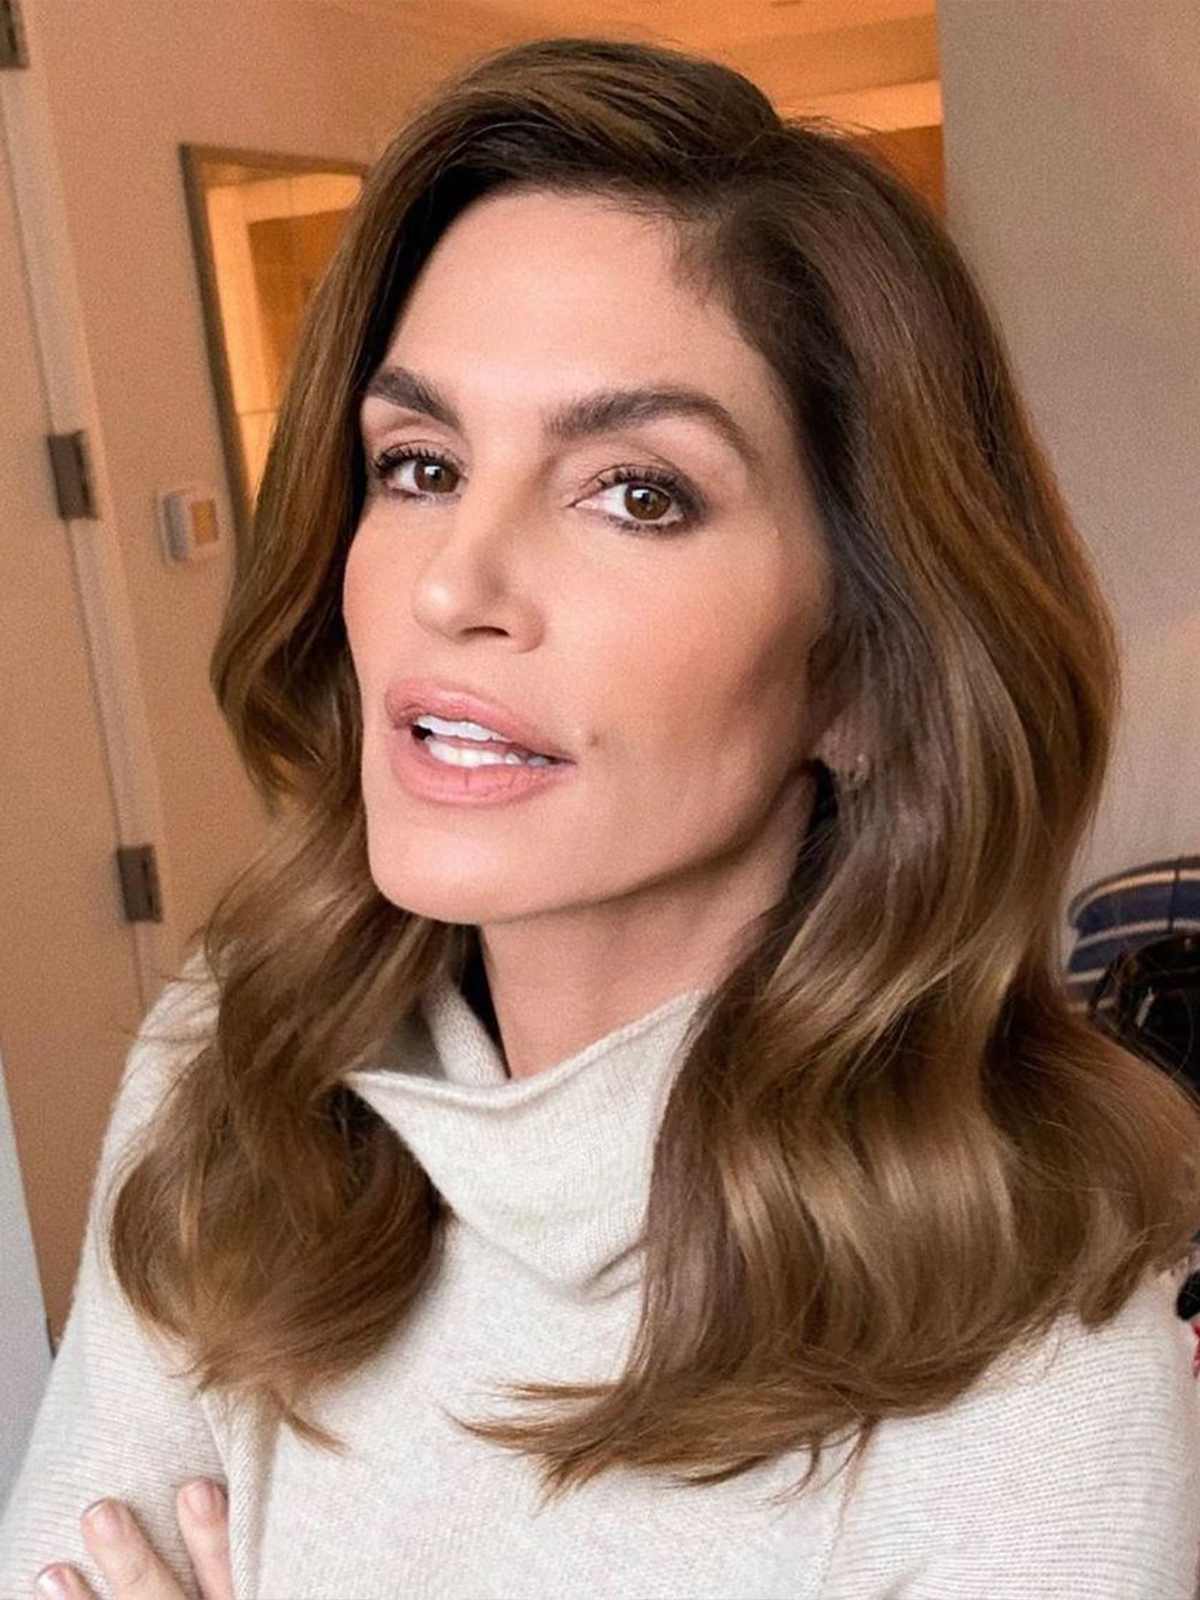 Haircuts for Women in Their 50s: Cindy Crawford